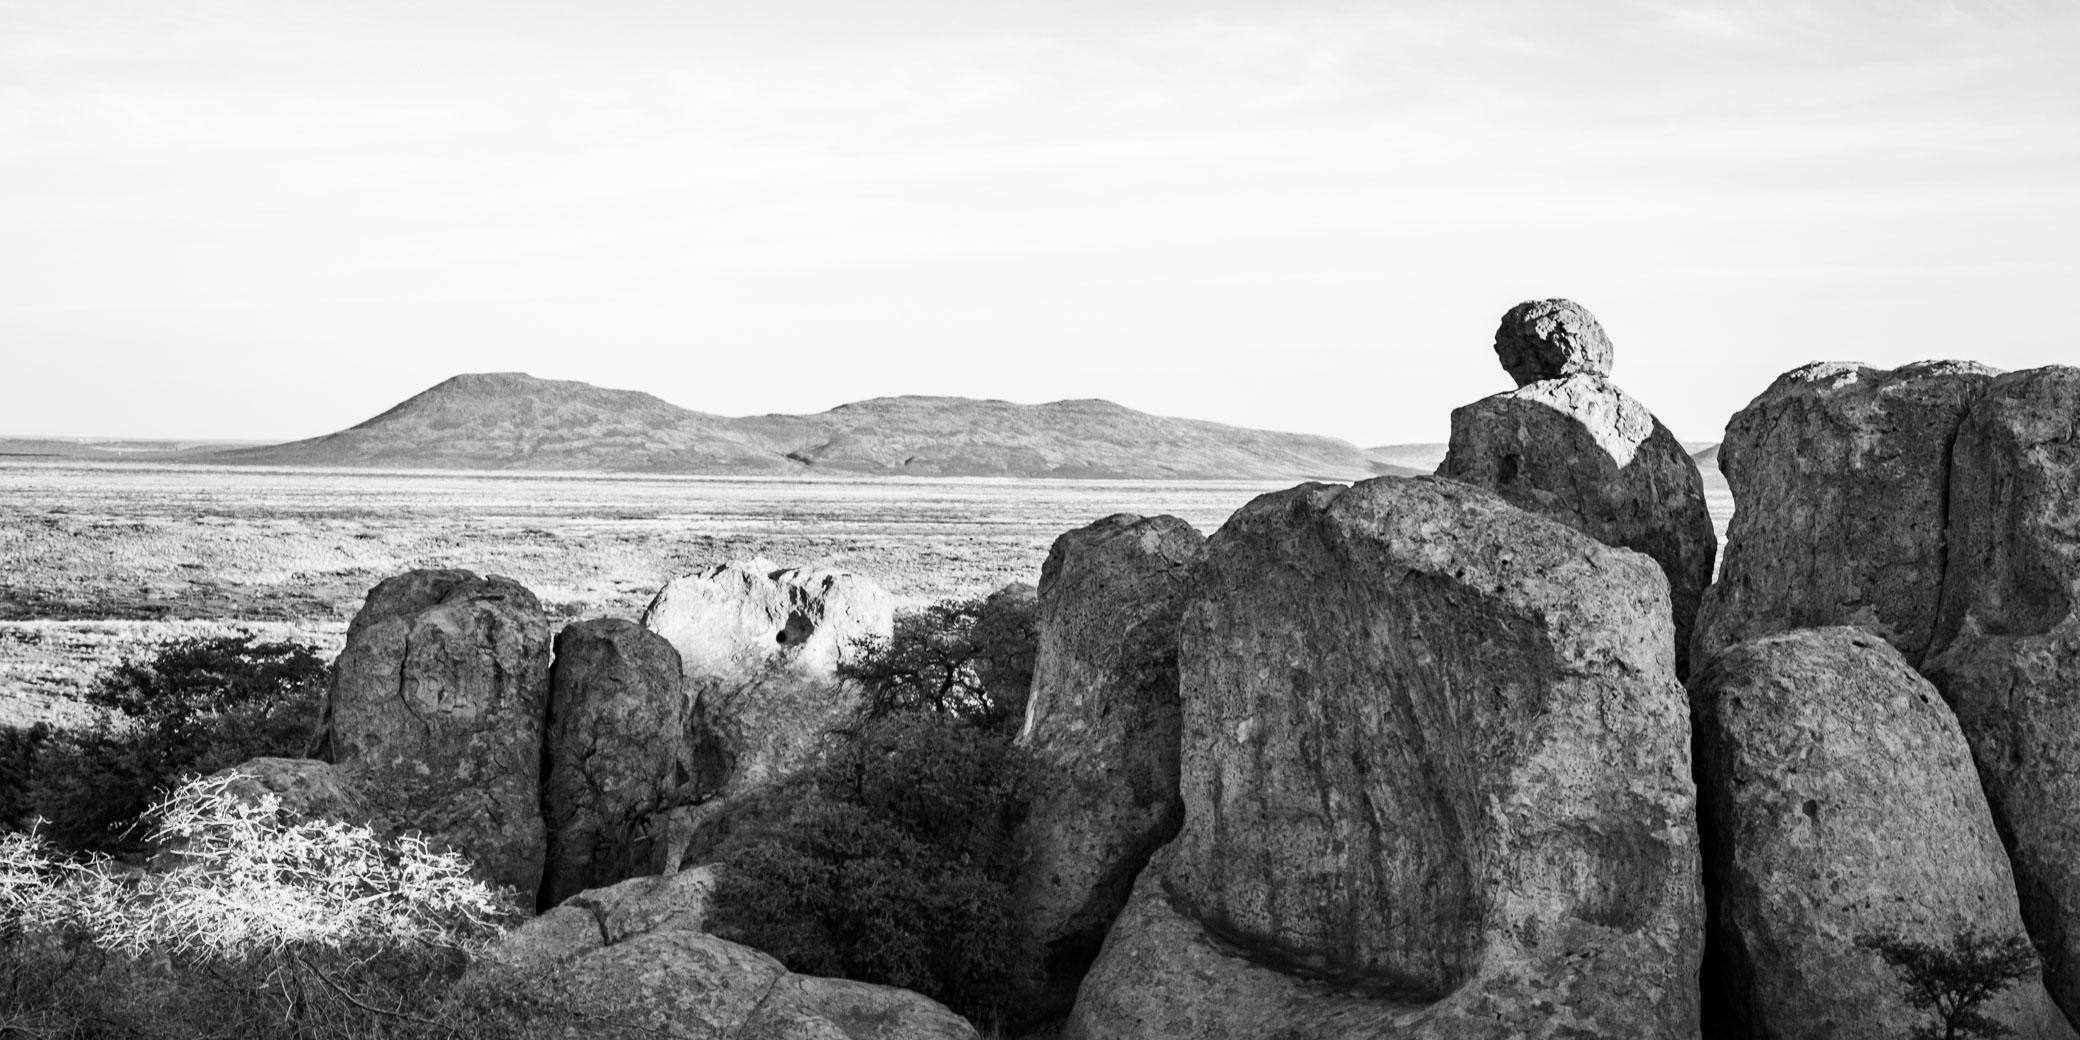 Mimetolith of a reader at sunrise, City of Rocks State Park, Faywood NM, April 11, 2017